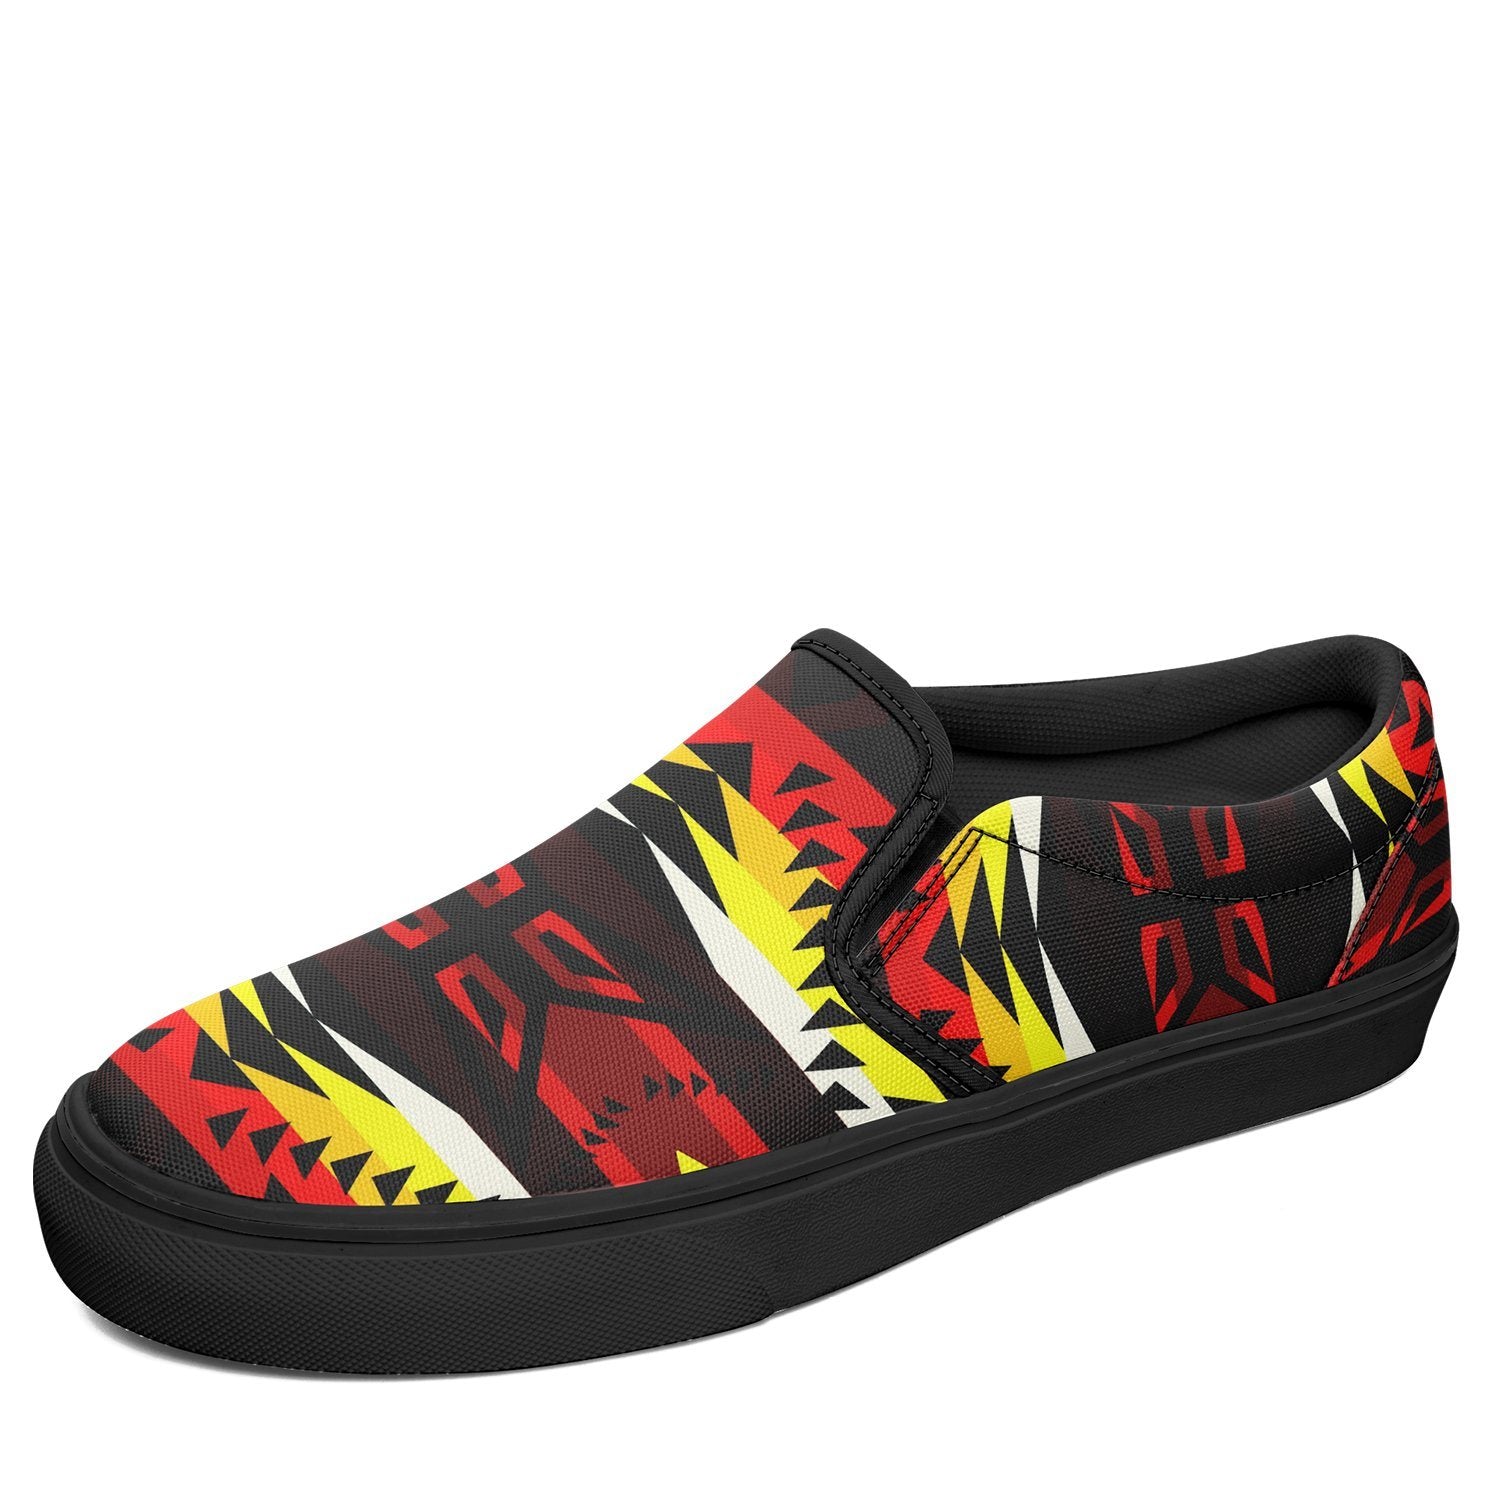 Canyon War Party Otoyimm Canvas Slip On Shoes 49 Dzine 